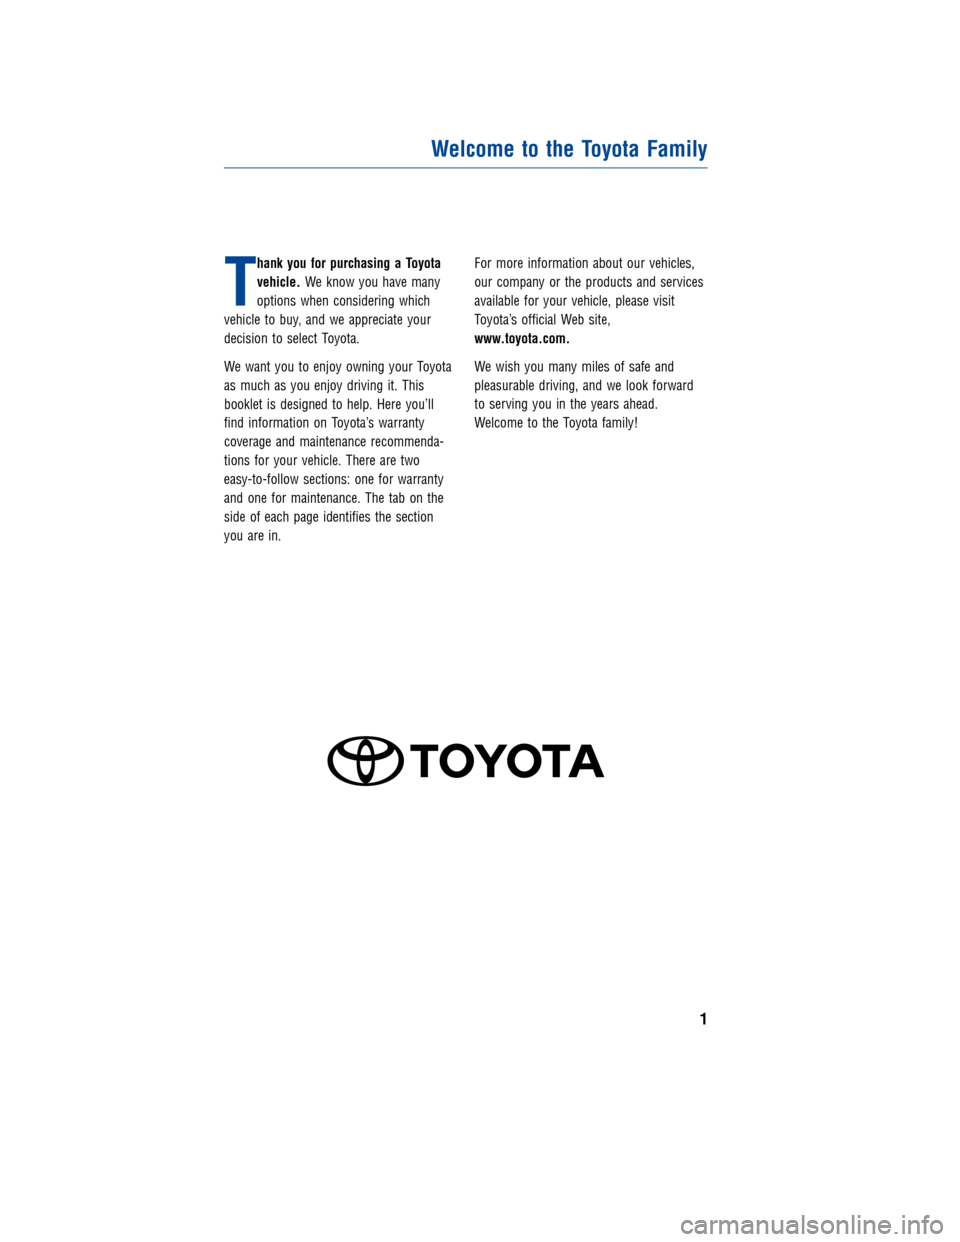 TOYOTA LAND CRUISER 2013 J200 Warranty And Maintenance Guide JOBNAME: 1131592-2013-lnd-toy PAGE: 1 SESS: 4 OUTPUT: Wed Jan 4 09:27:40 2012
/tweddle/toyota/sched-maint/1131592-en-lnd/wg
T
hank you for purchasing a Toyota
vehicle.We know you have many
options whe